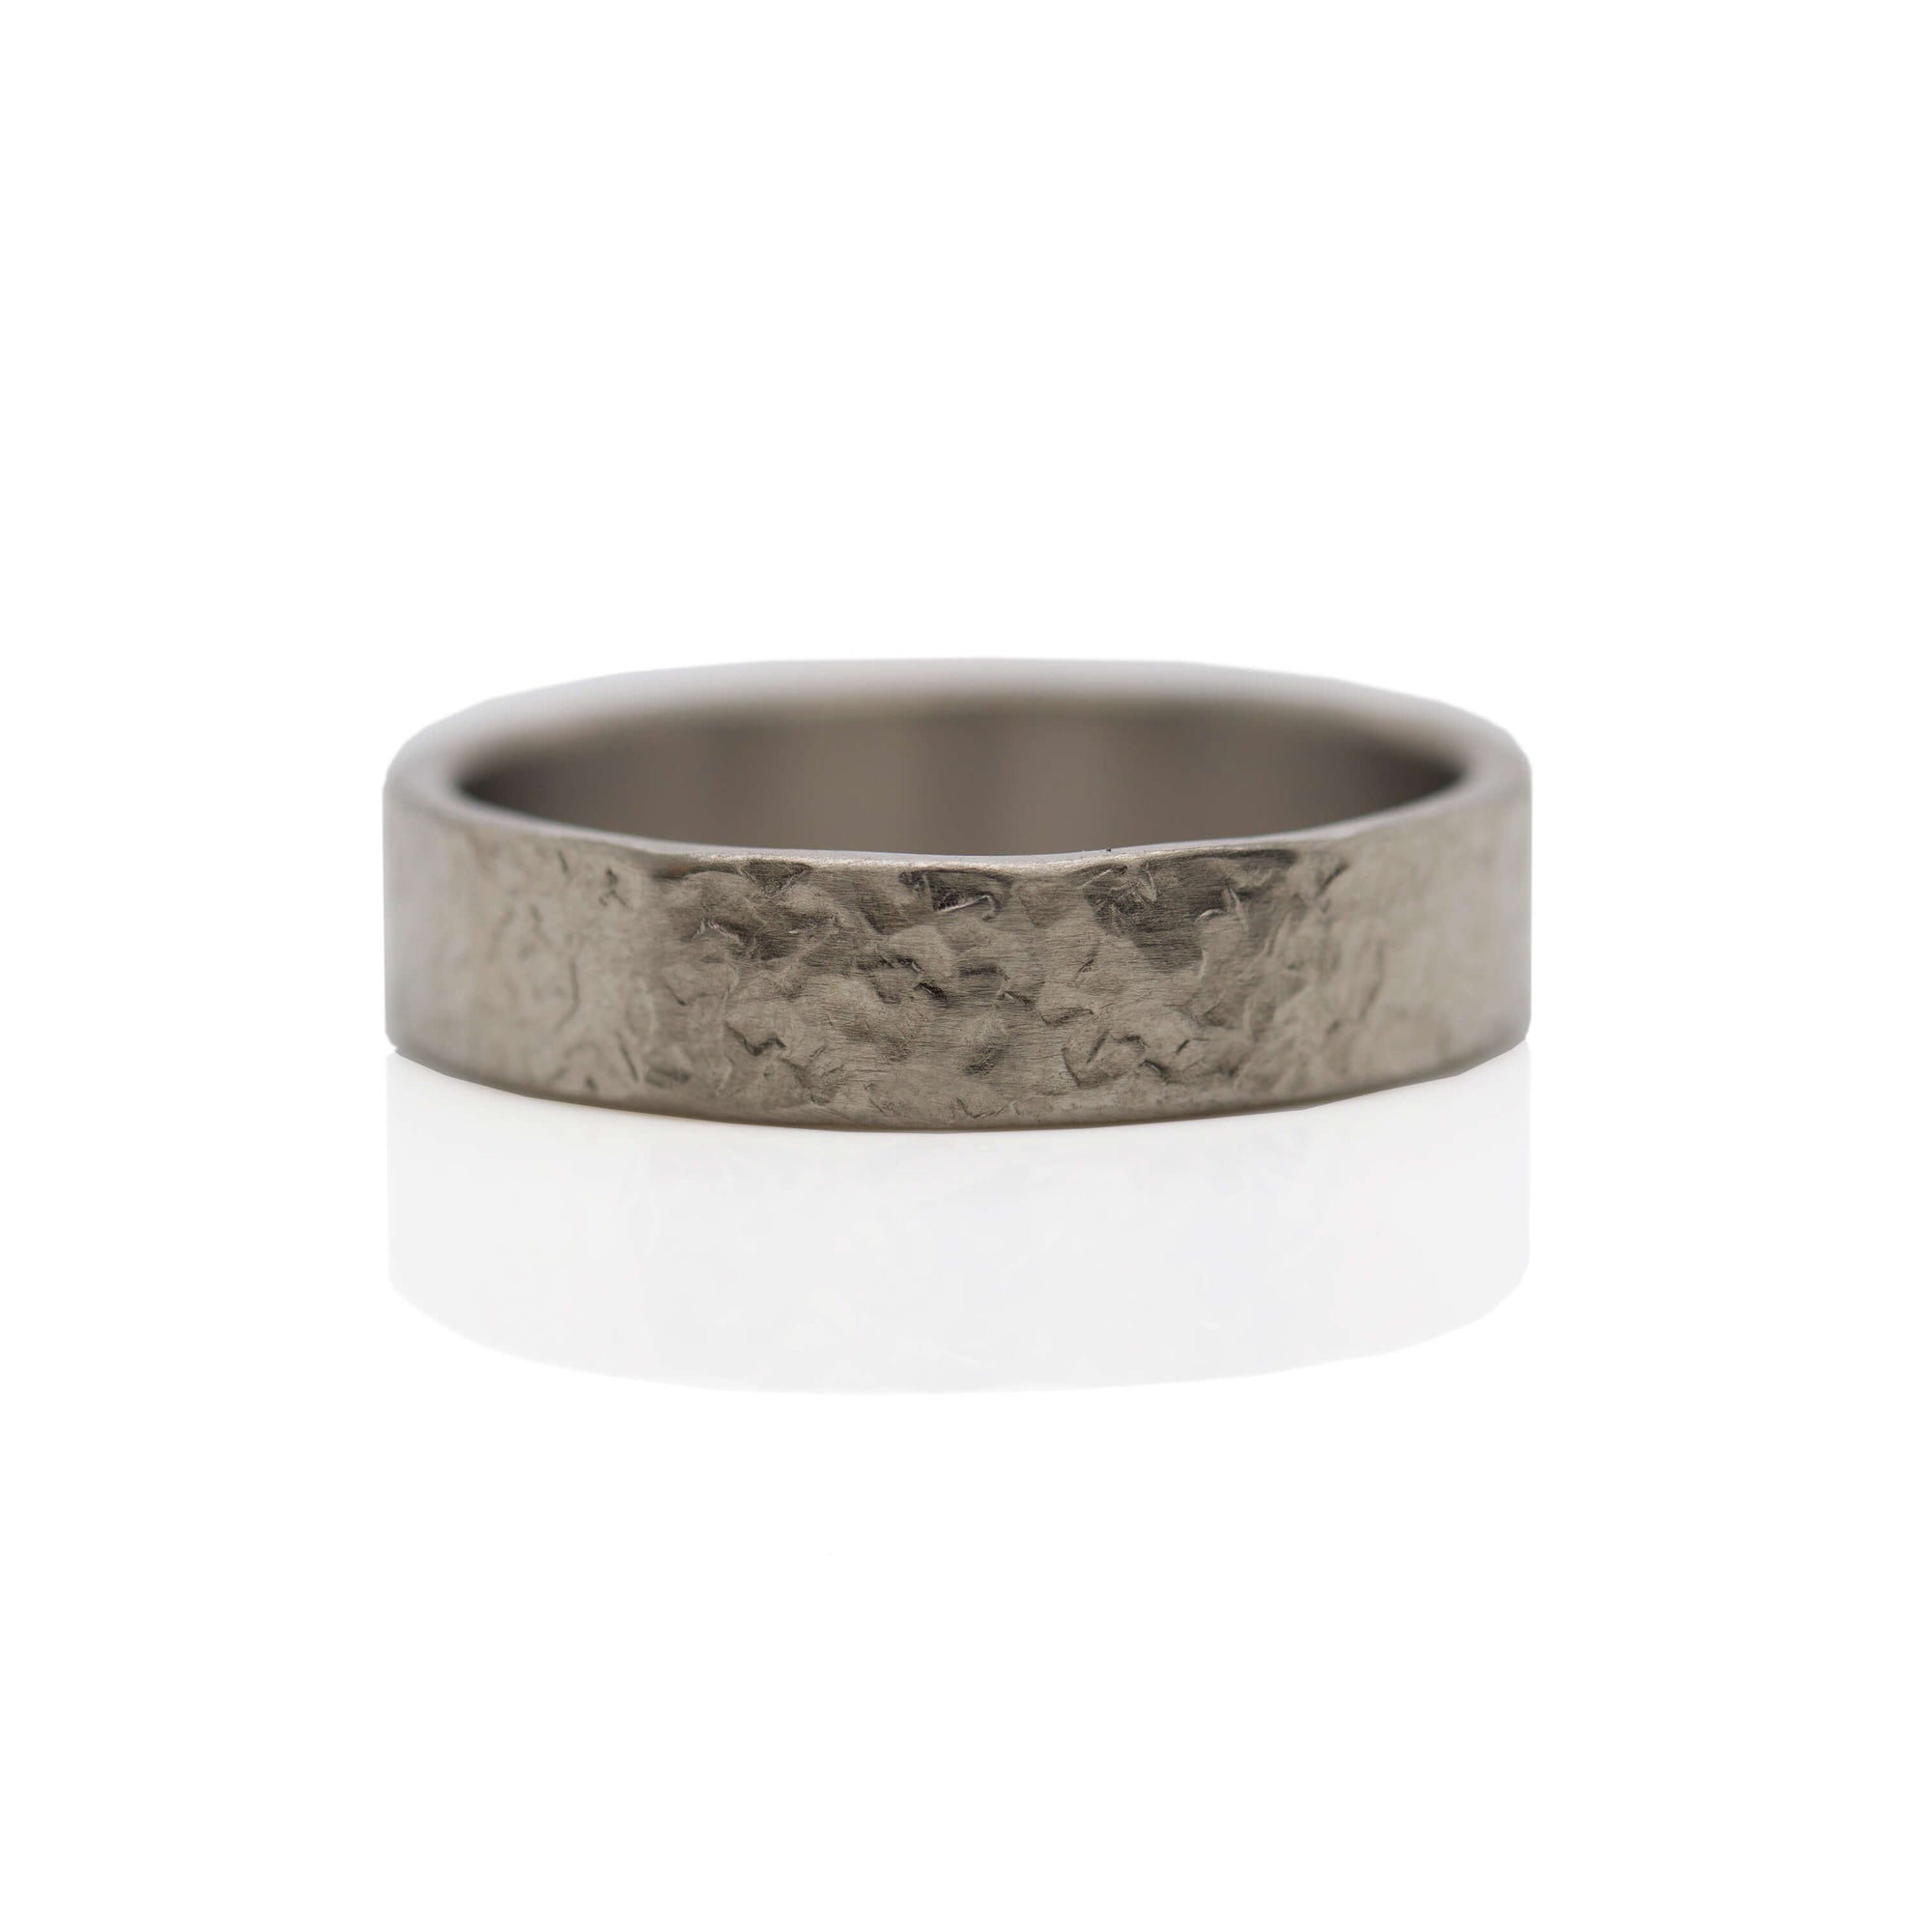 Silk hammered palladium wedding band made with recycled metal. EC Design Jewelry in Minneapolis, MN.